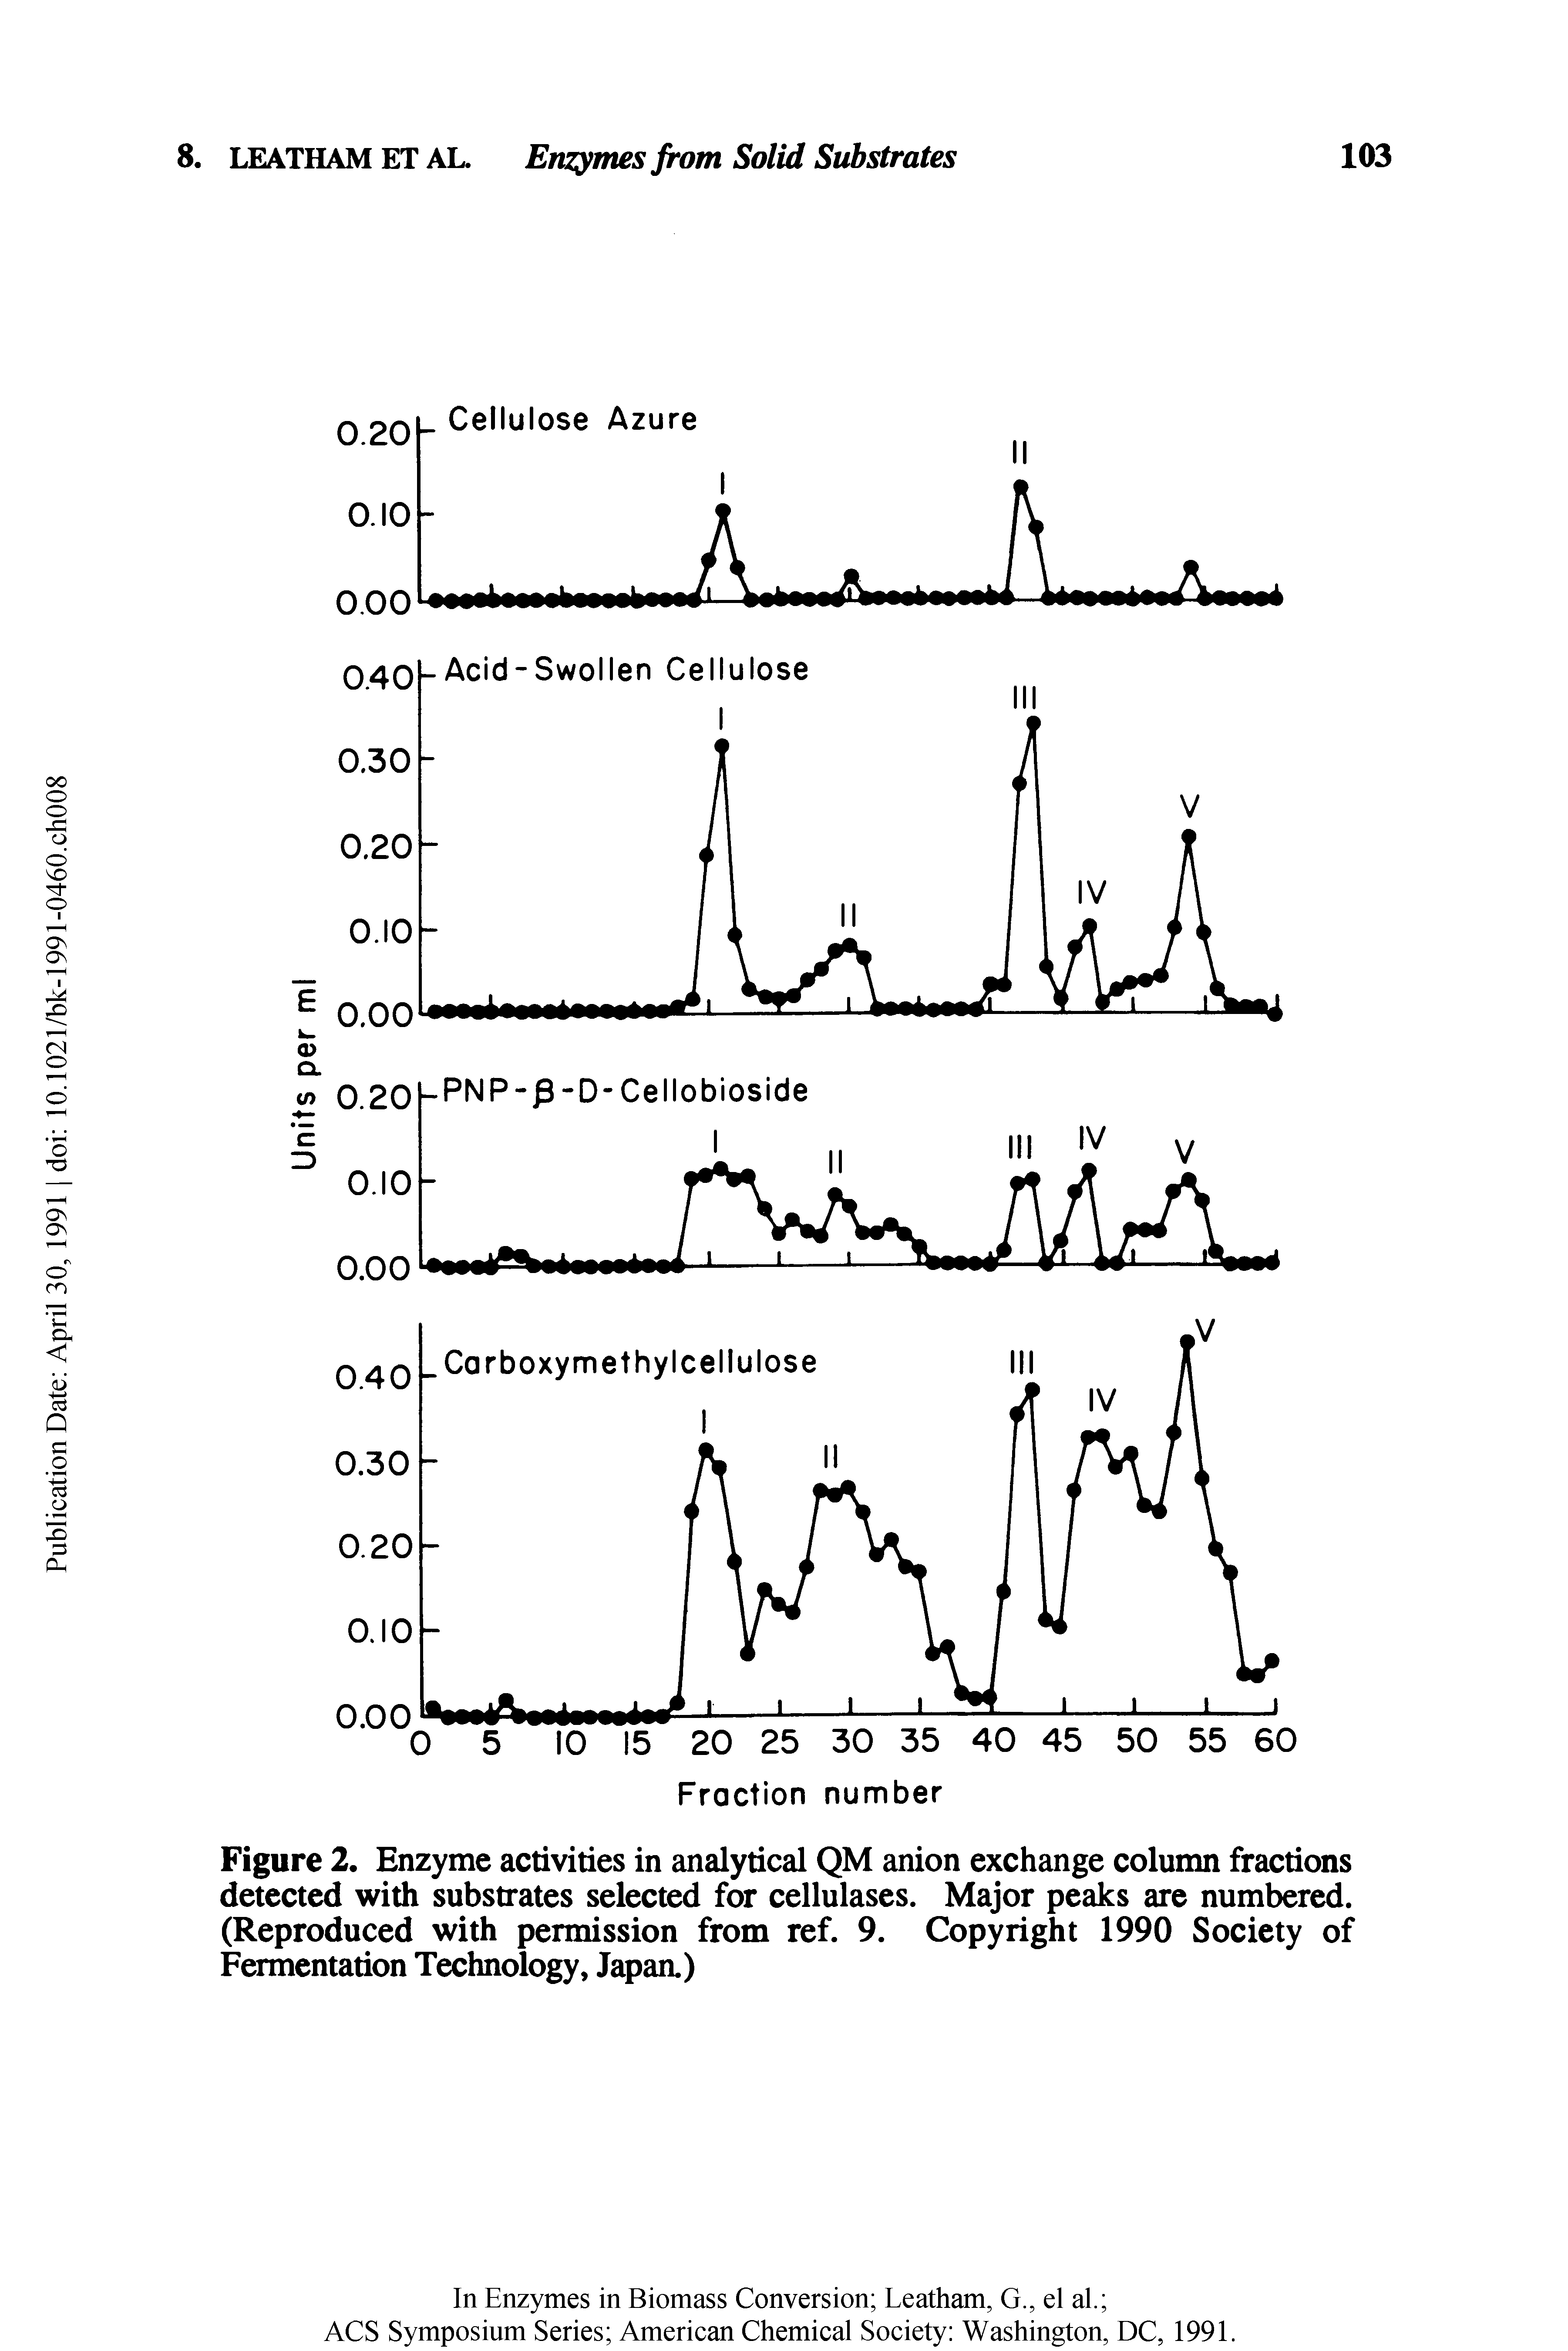 Figure 2. Enzyme activities in analytical QM anion exchange column fractions detected with substrates selected for cellulases. Major peaks are numbered. (Reproduced with permission from ref. 9. Copyright 1990 Society of Fermentation Technology, Japan.)...